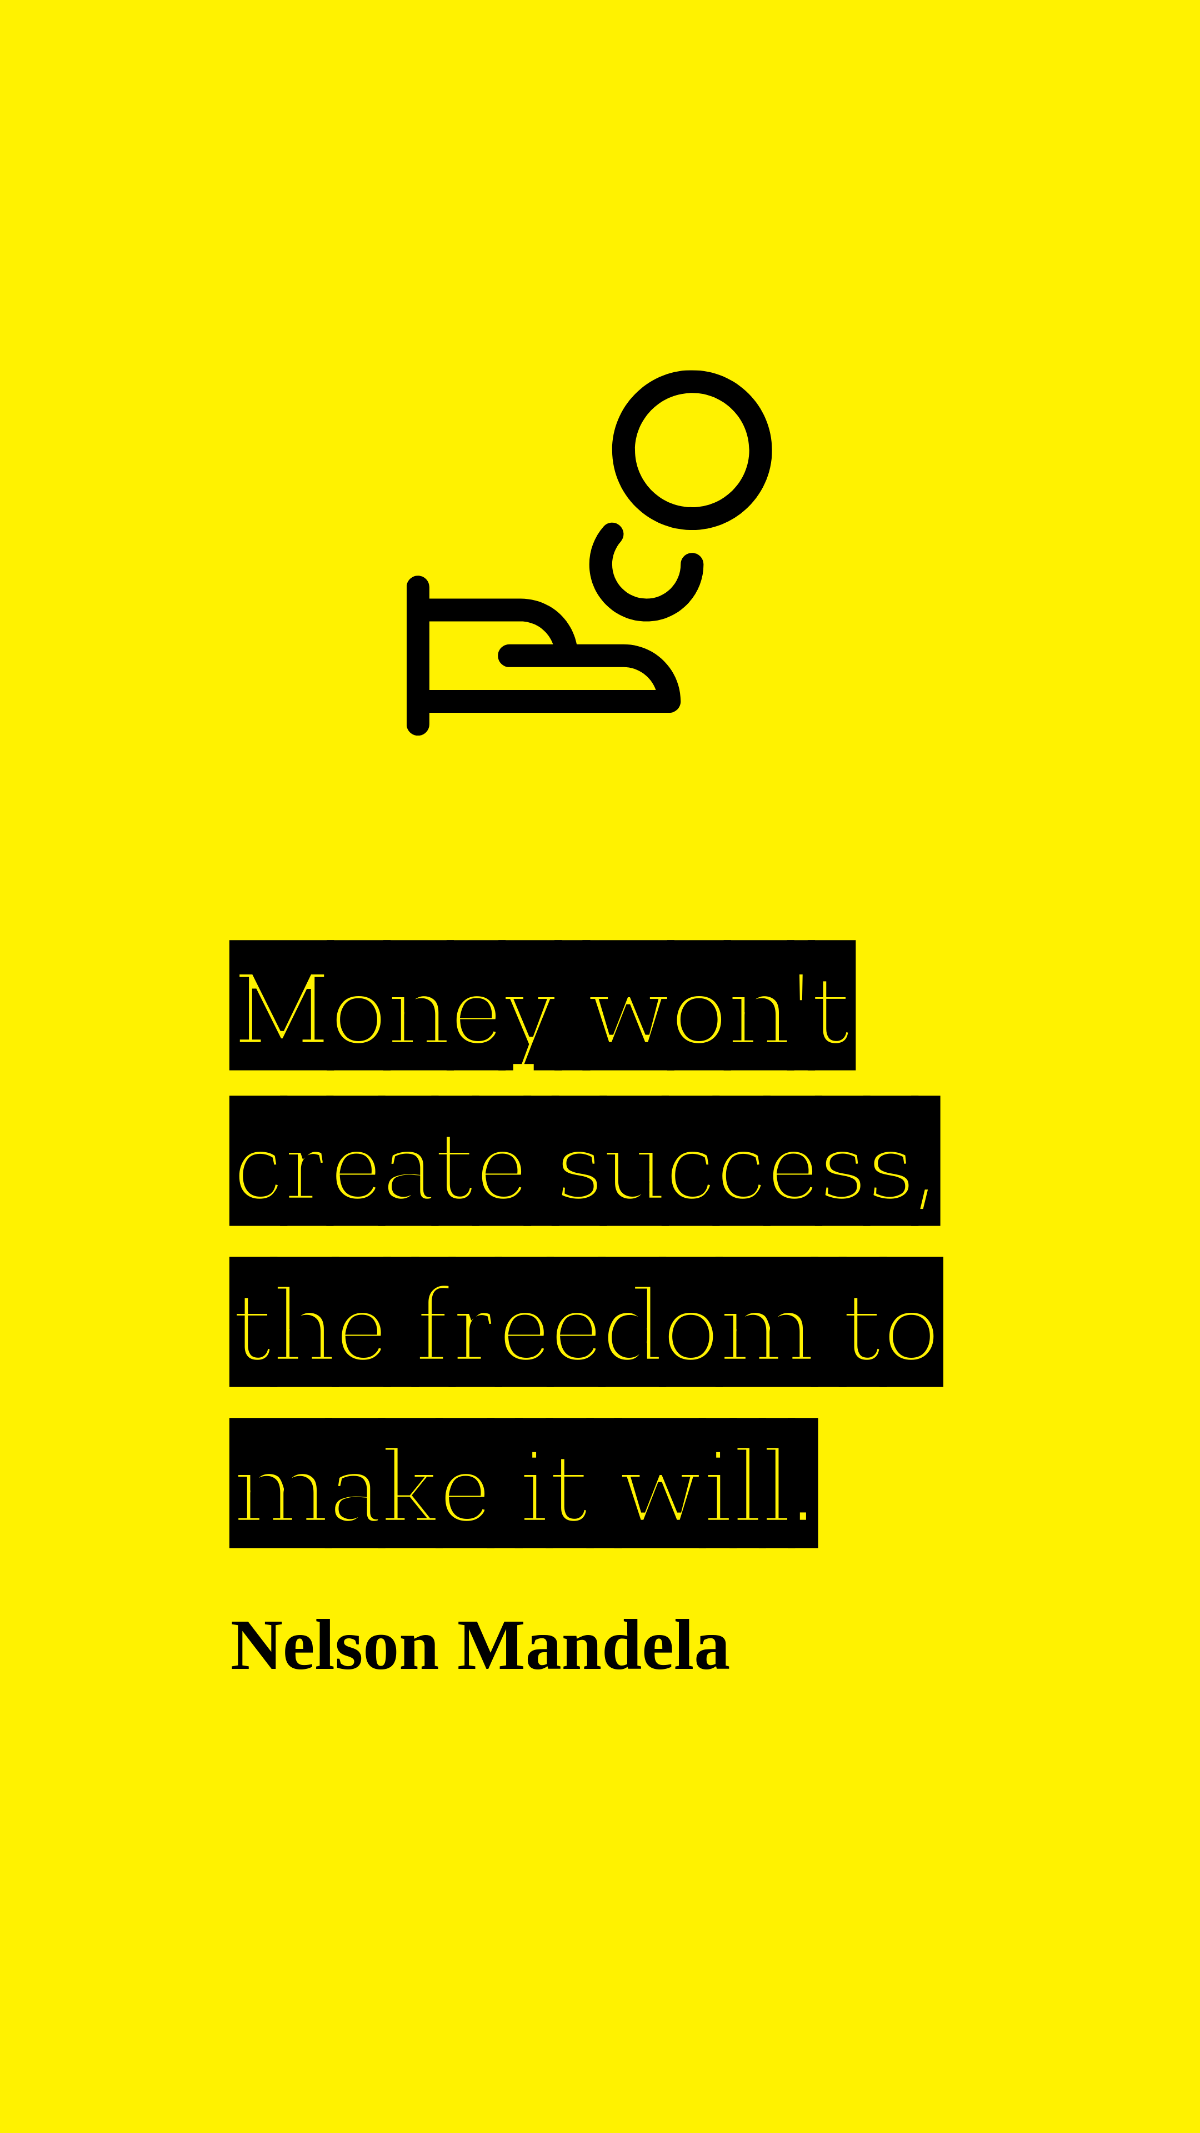 Nelson Mandela - Money won't create success, the freedom to make it will. Template